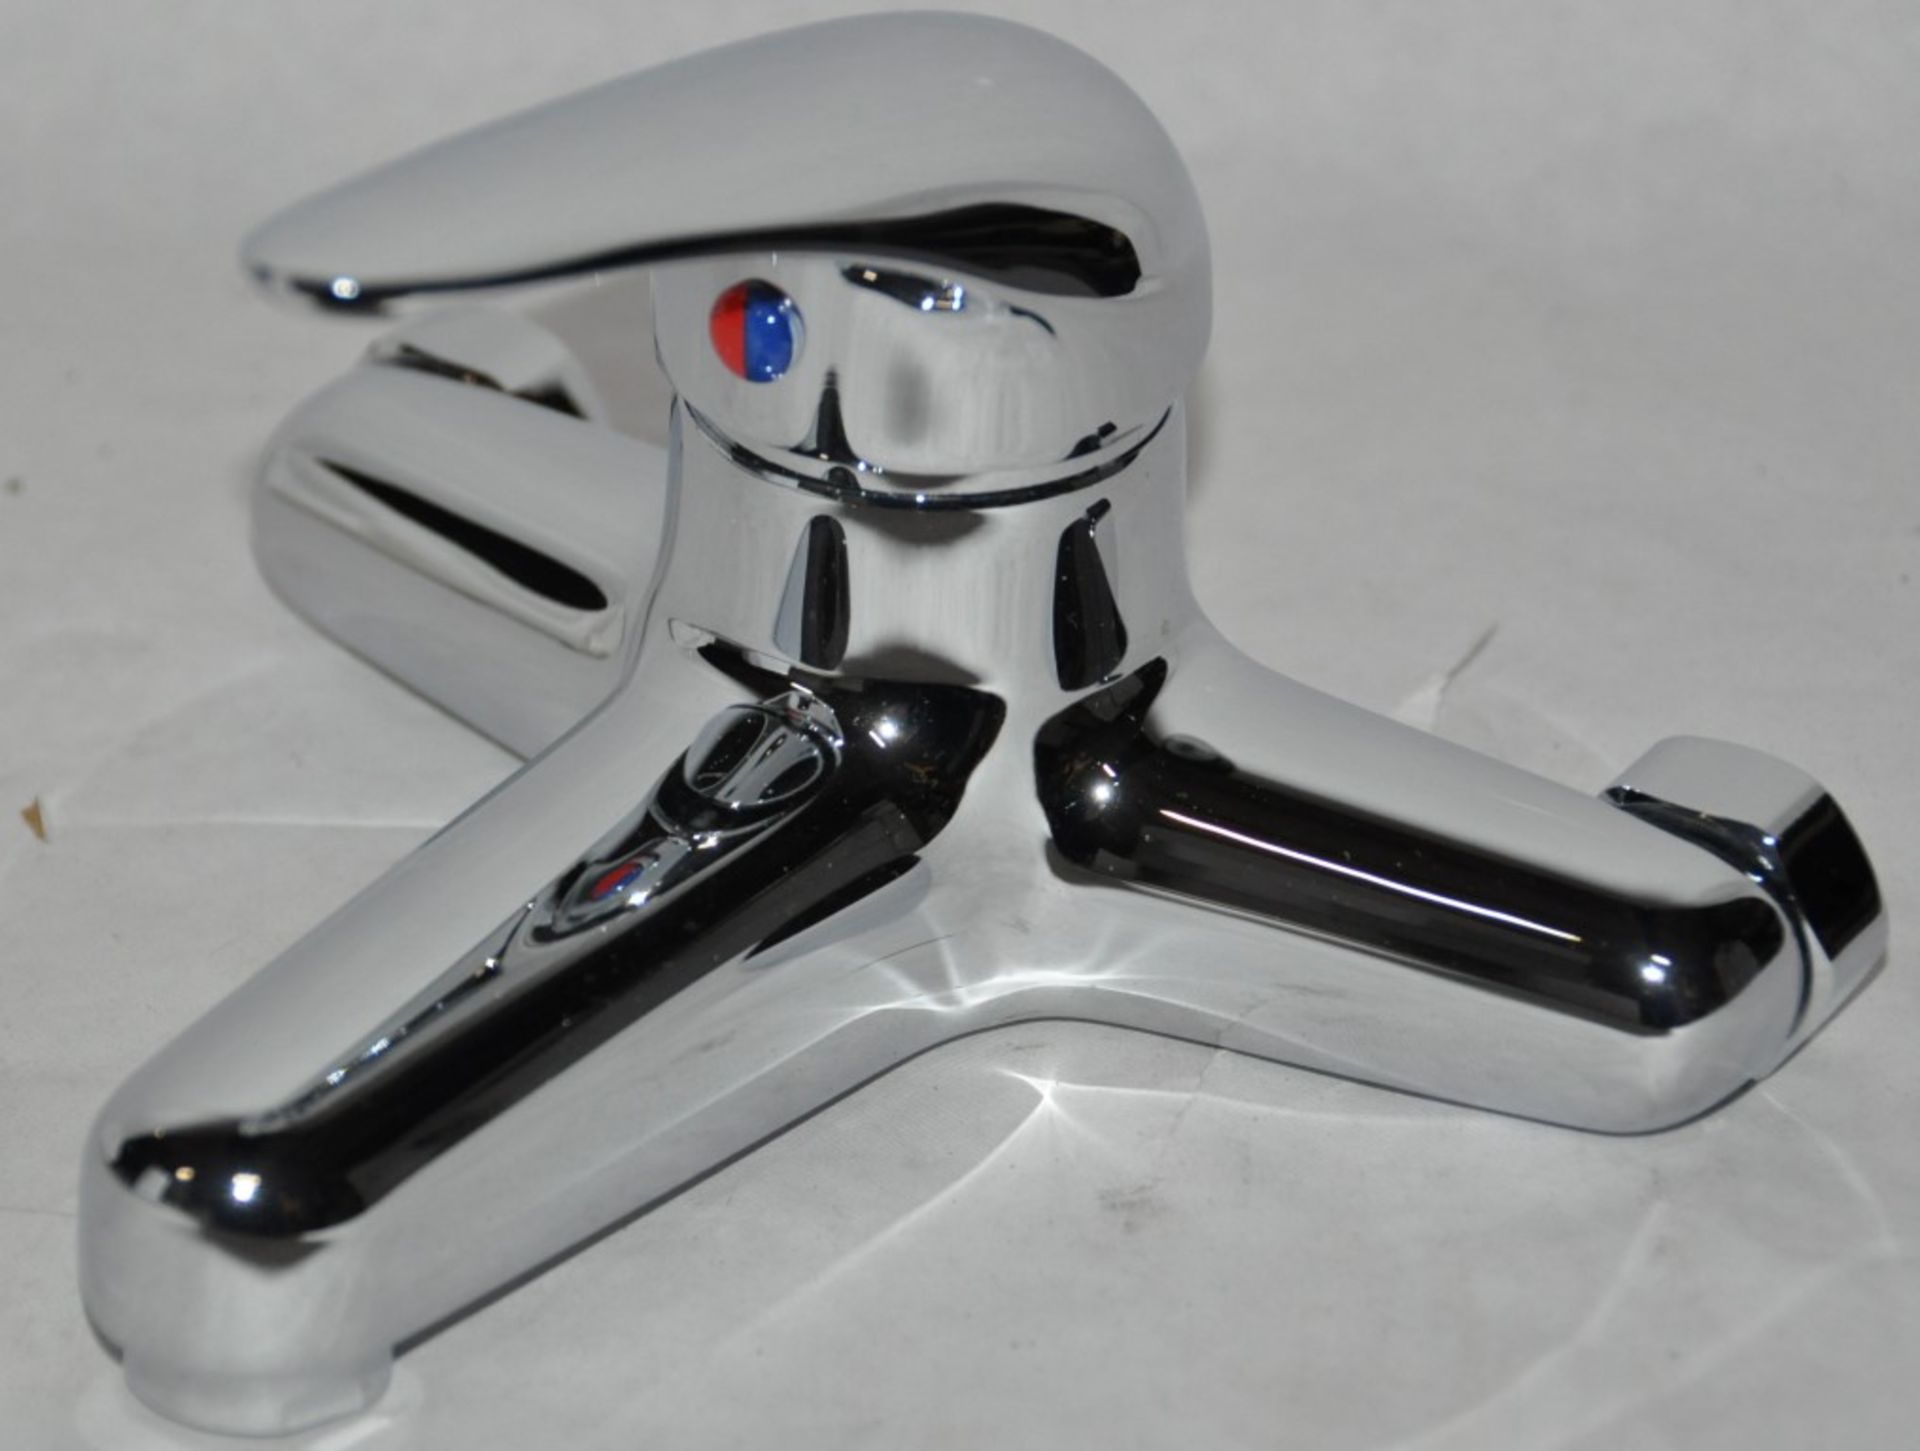 1 x Chrome Bath Filler – Used Commercial Samples - Boxed in Good Condition – Complete – Model :